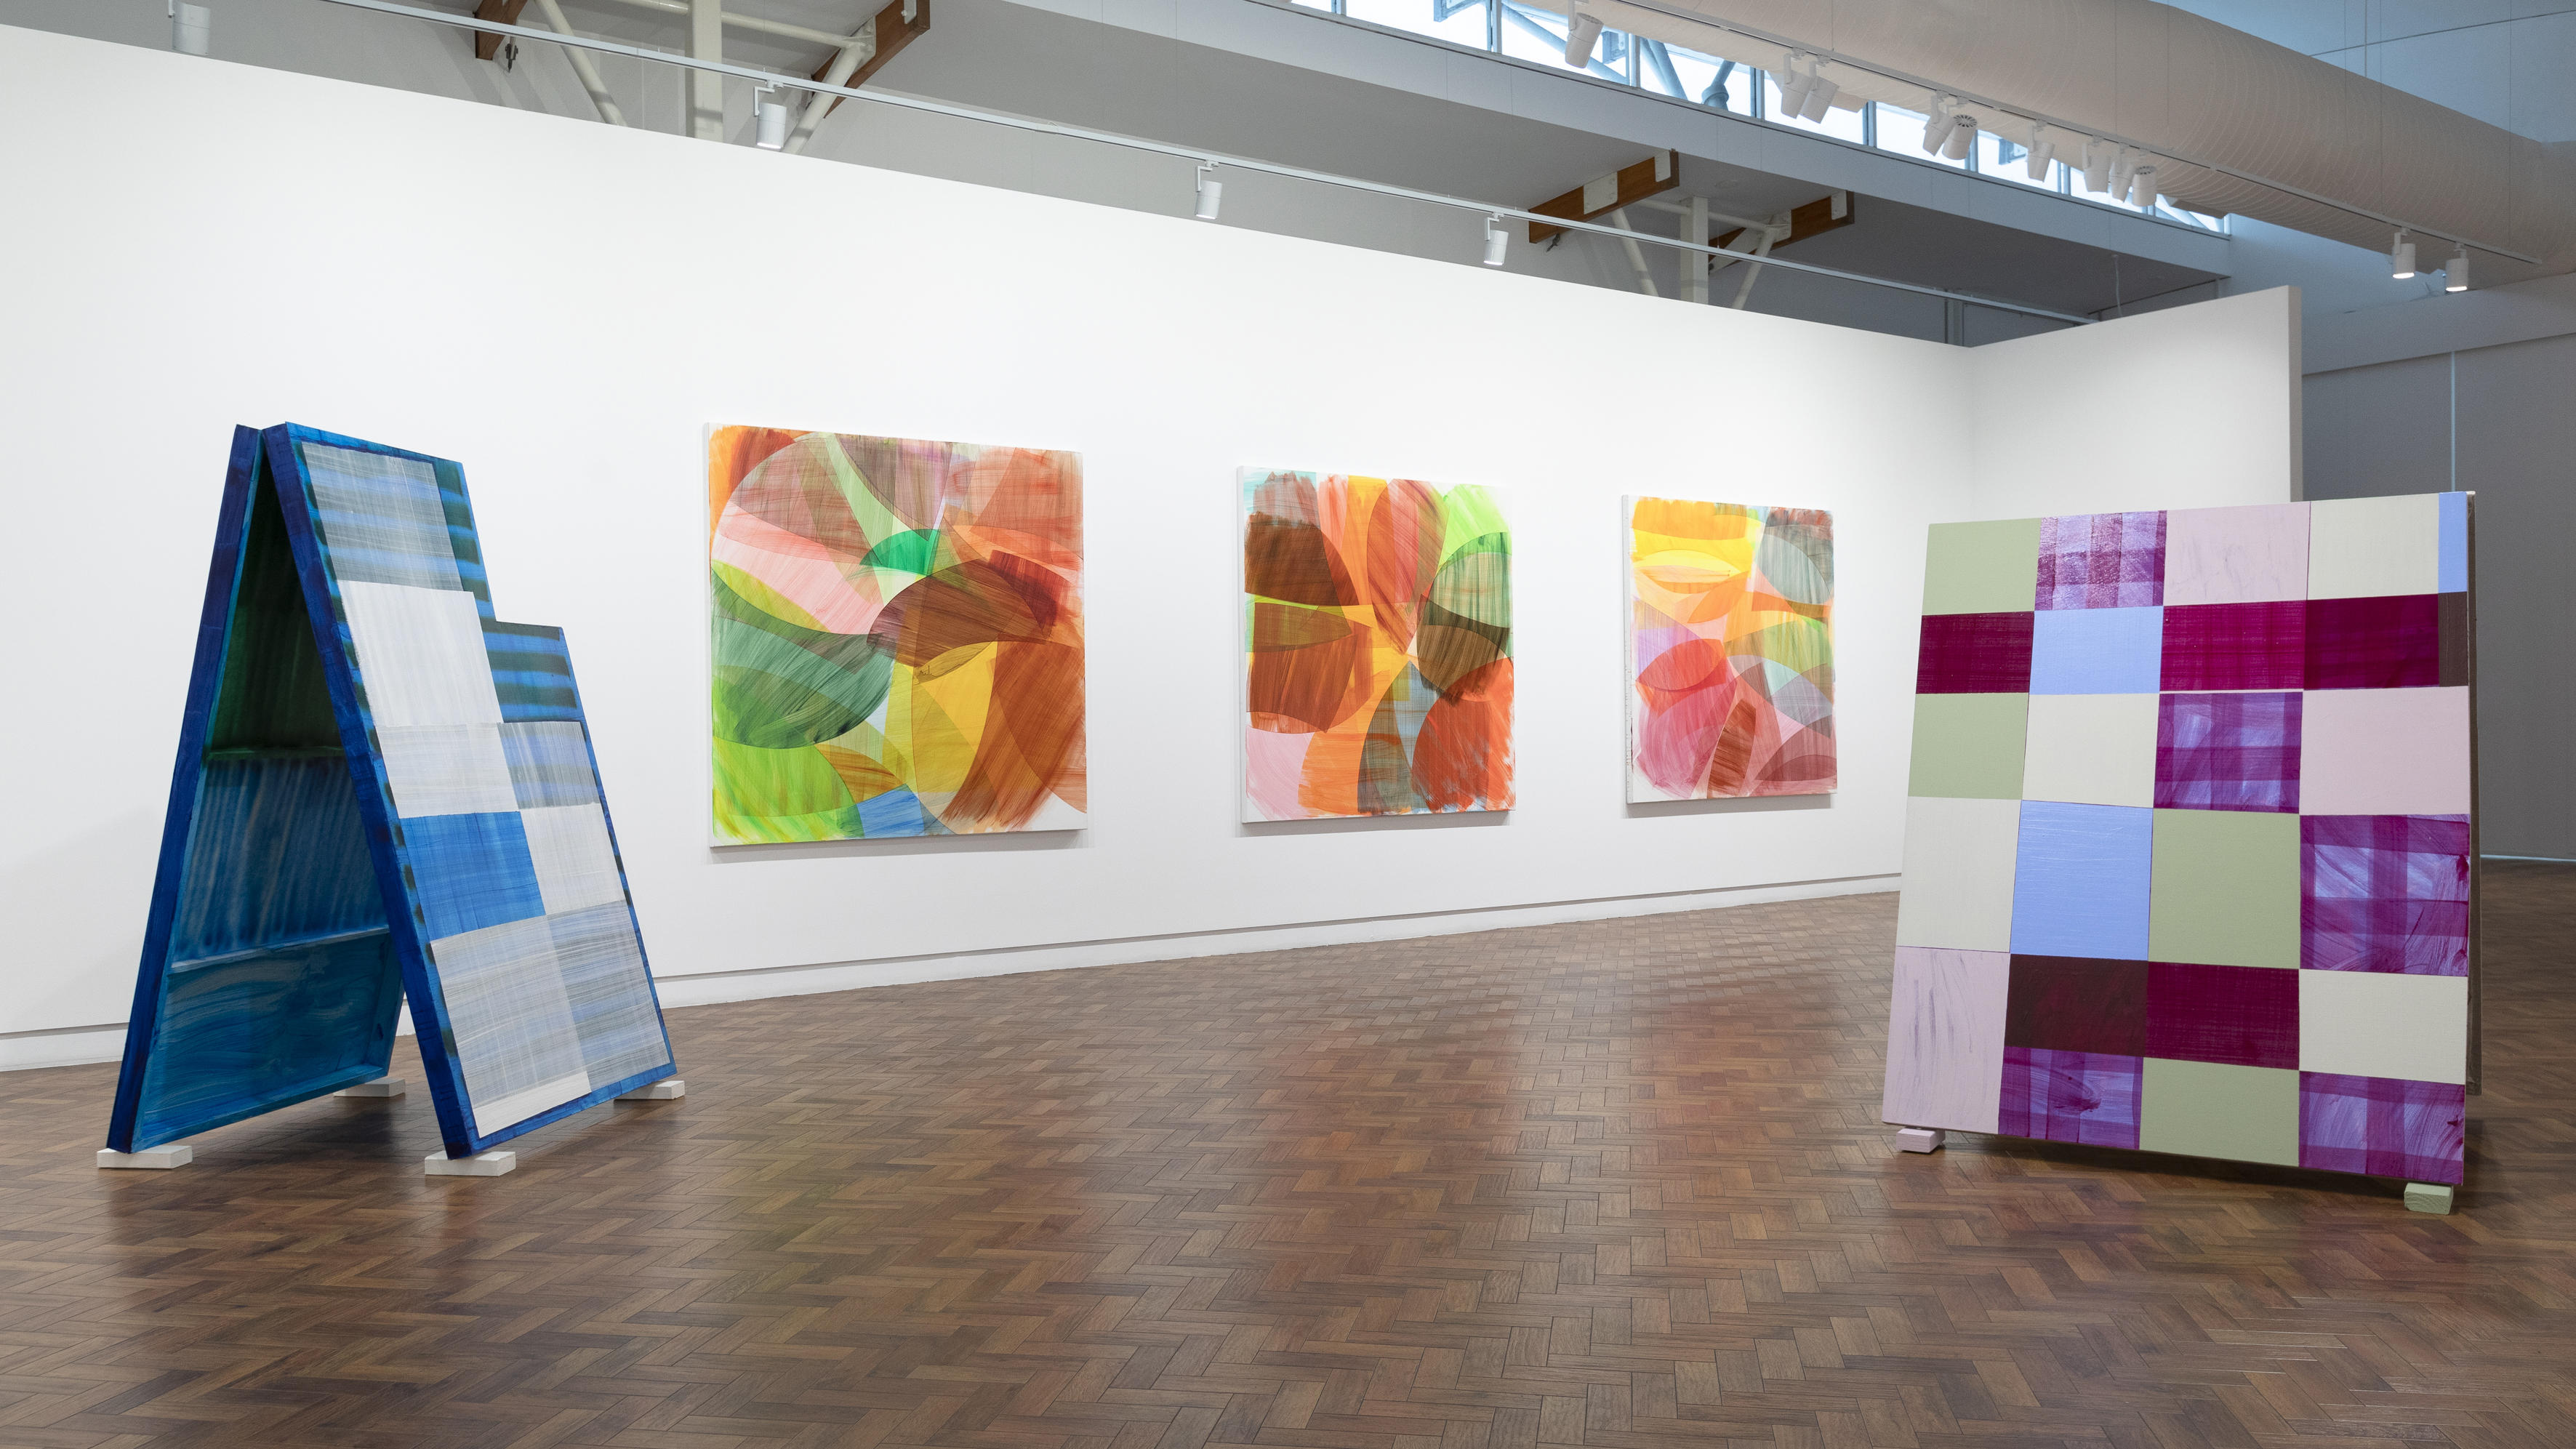 Installation view Bright featuring Emma Beer, #bossyapp, 2018; Gemma Smith, Thrown open, 2022, Gemma Smith, Collage painting, 2022,Gemma Smith, Haptic bounty, 2022; and Emma Beer, #communication, 2022.  Photograph: Silversalt Photography.